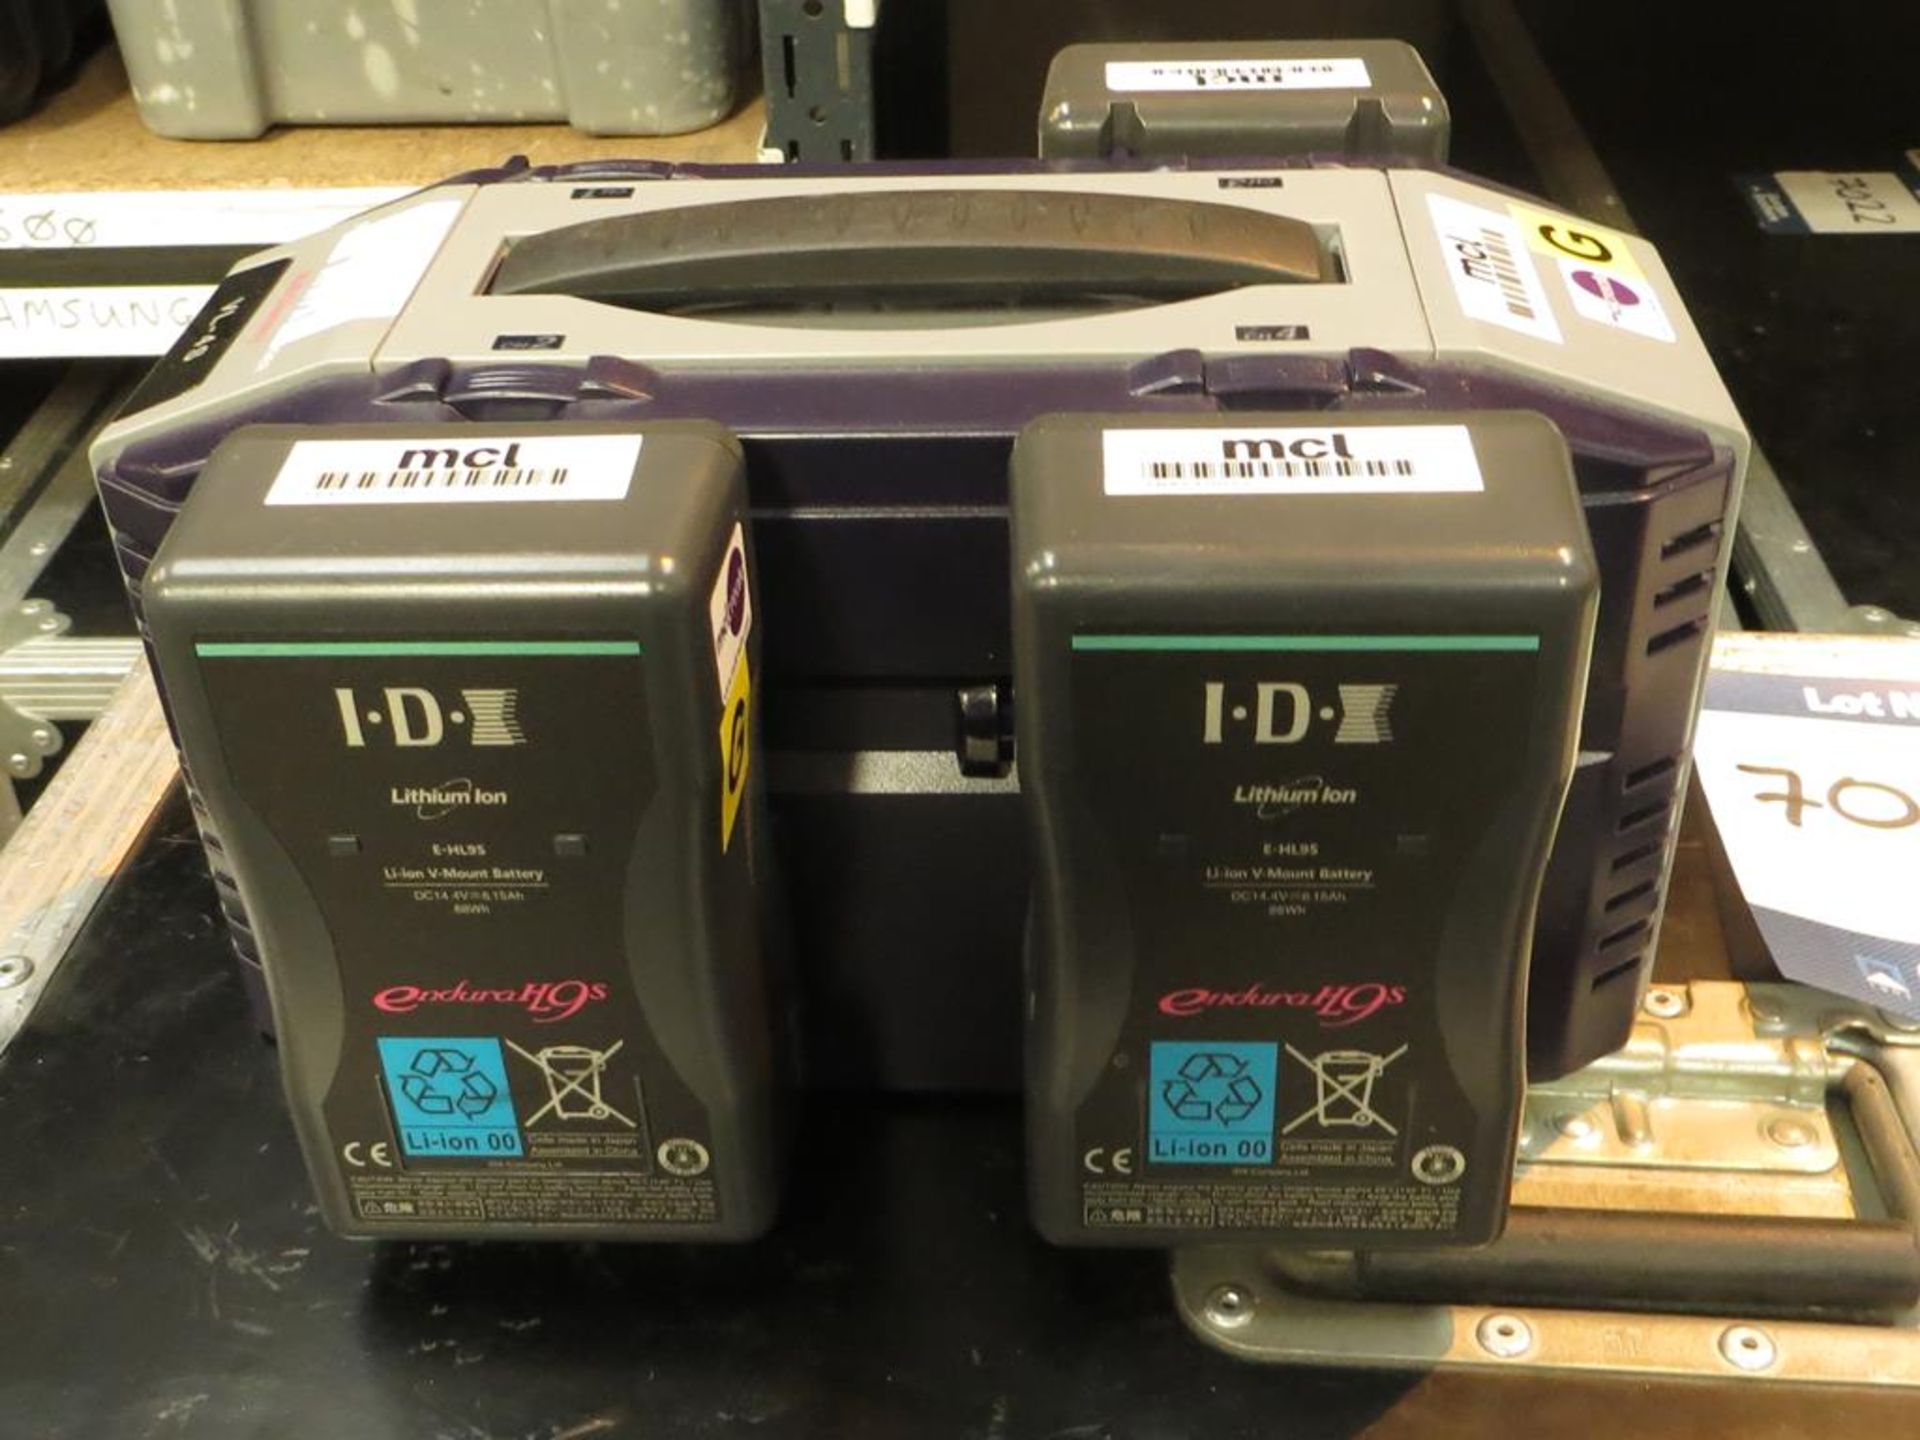 1DX4 four position battery charger, Model VL45, 240v and mains lead and 3x No. batteries in - Image 2 of 3